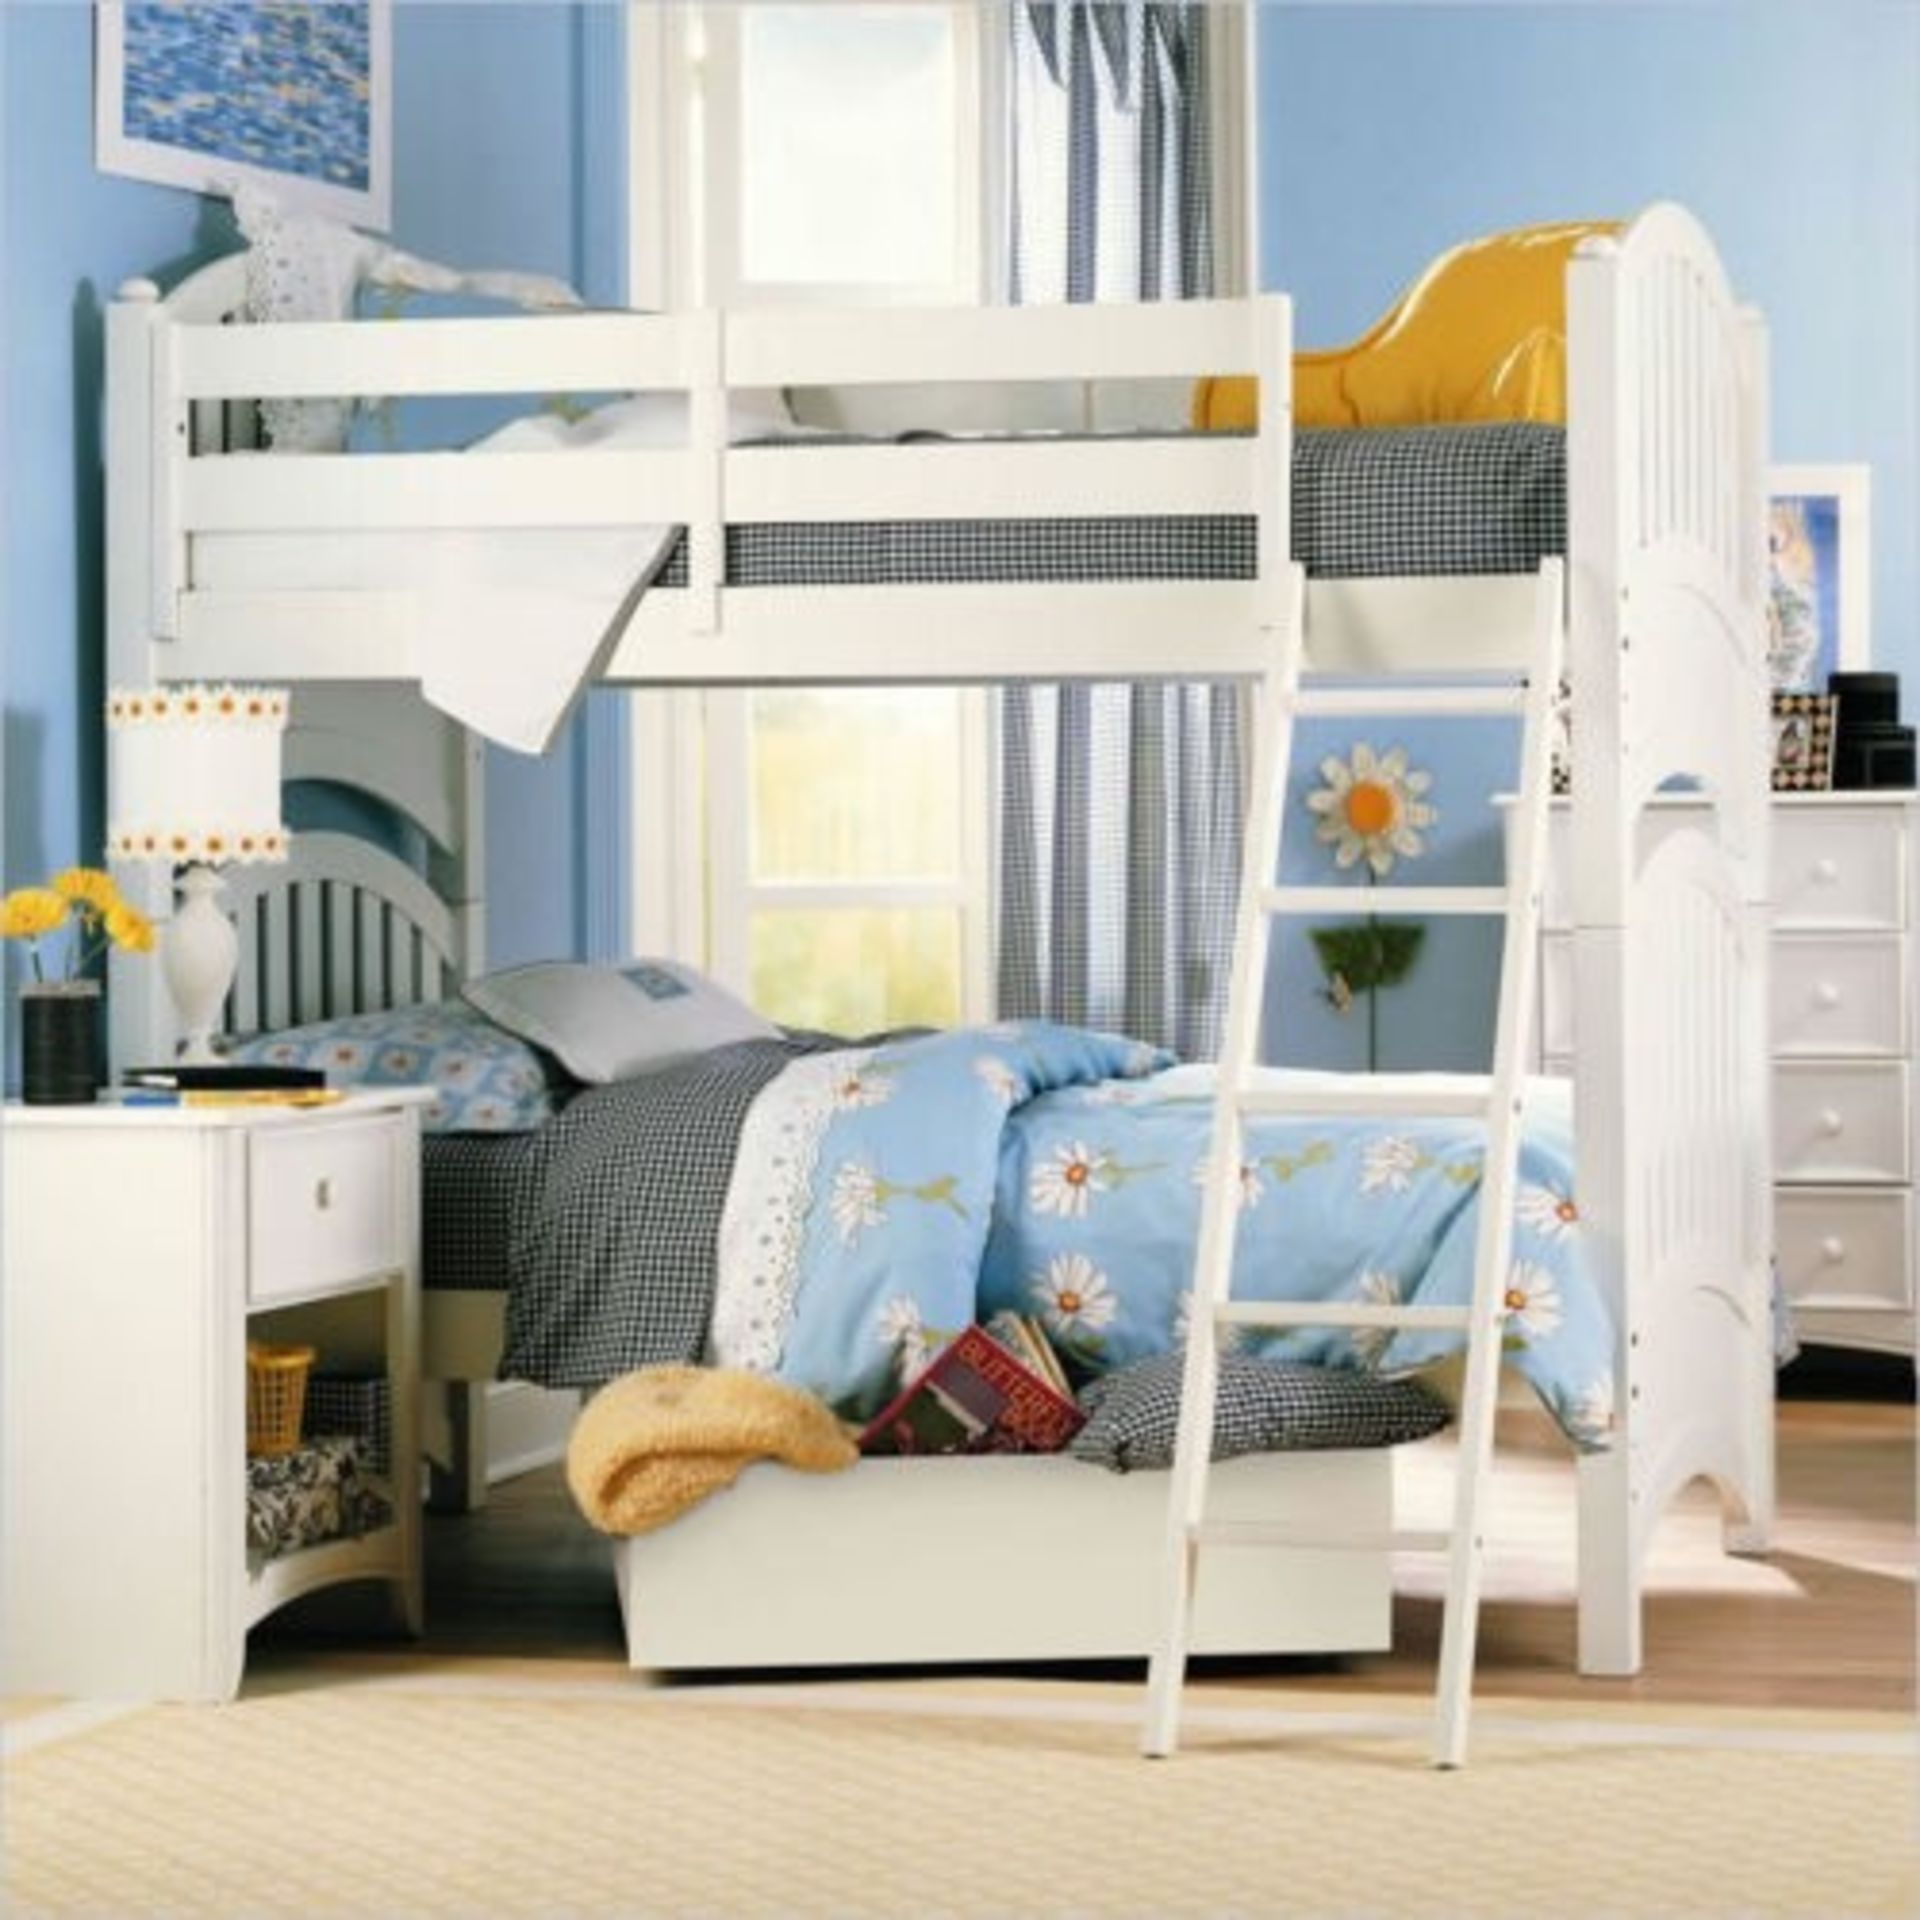 1 x Lea Getaway Twin over Twin Bunk Bed - Unused With Cosmetic Blemishes - CL011 - Location: